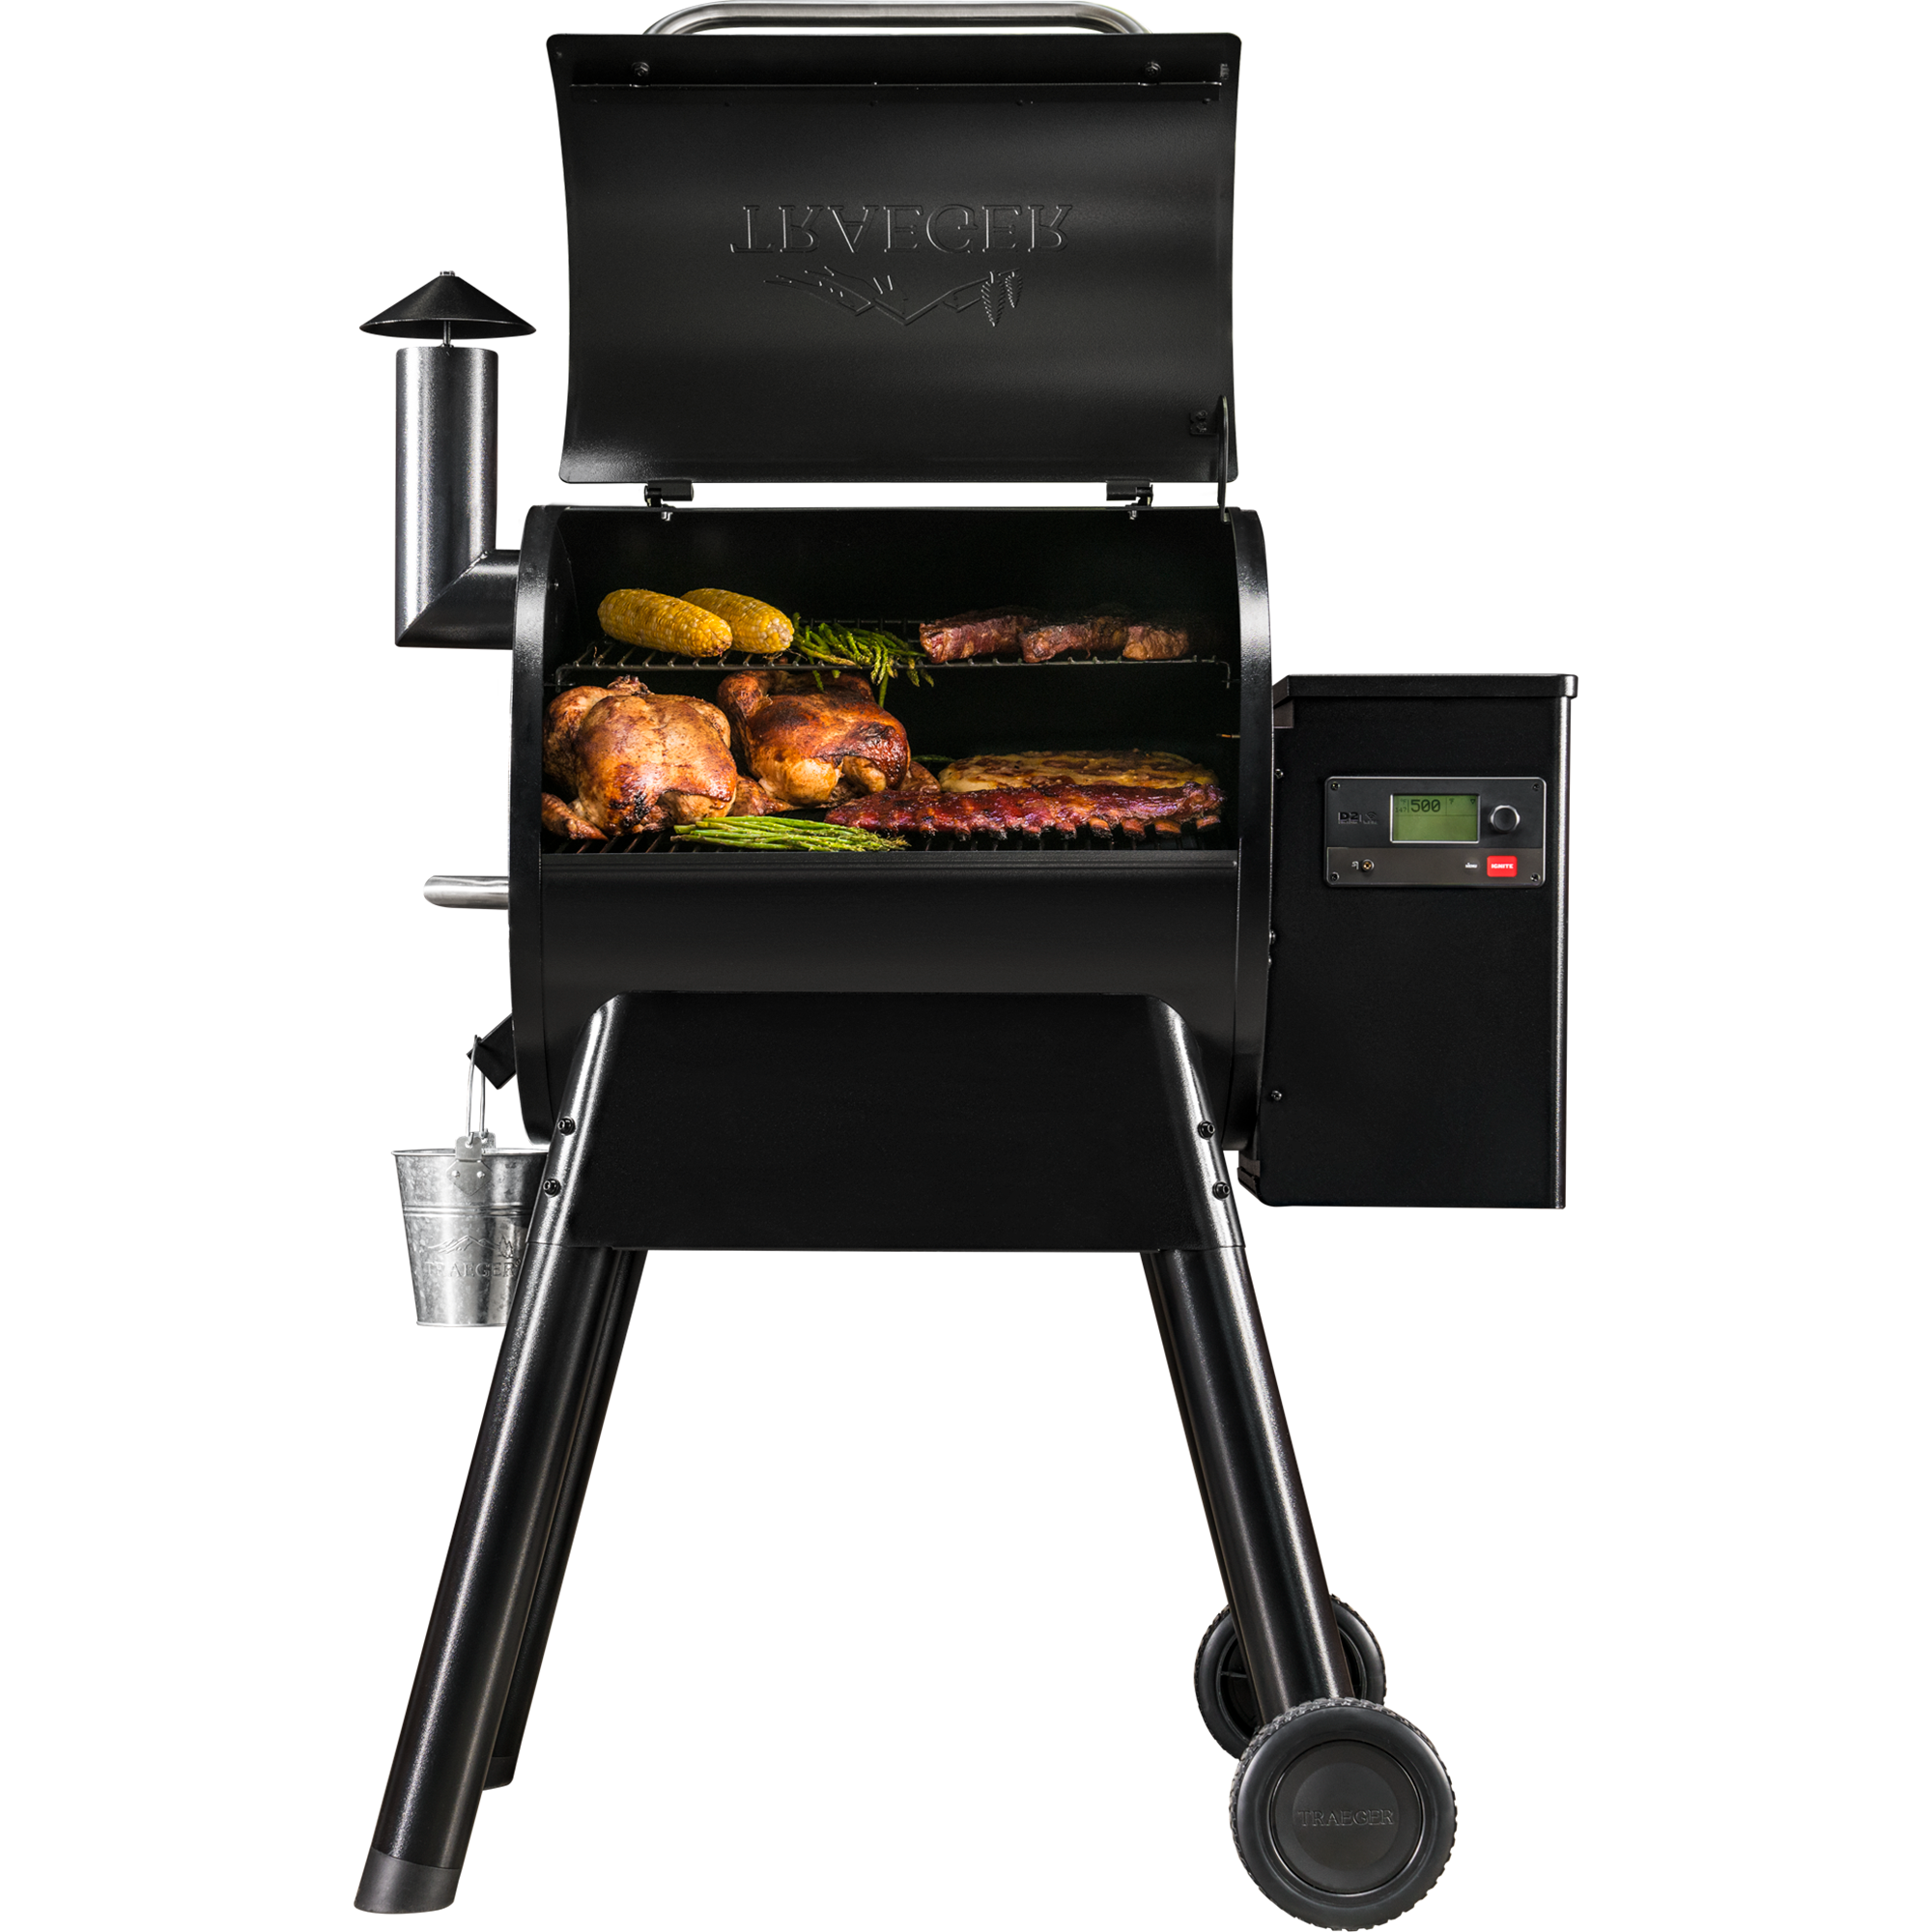 Traeger Pro 575 Black Wood Pellet Grill with Steaks and Chickens and Corns